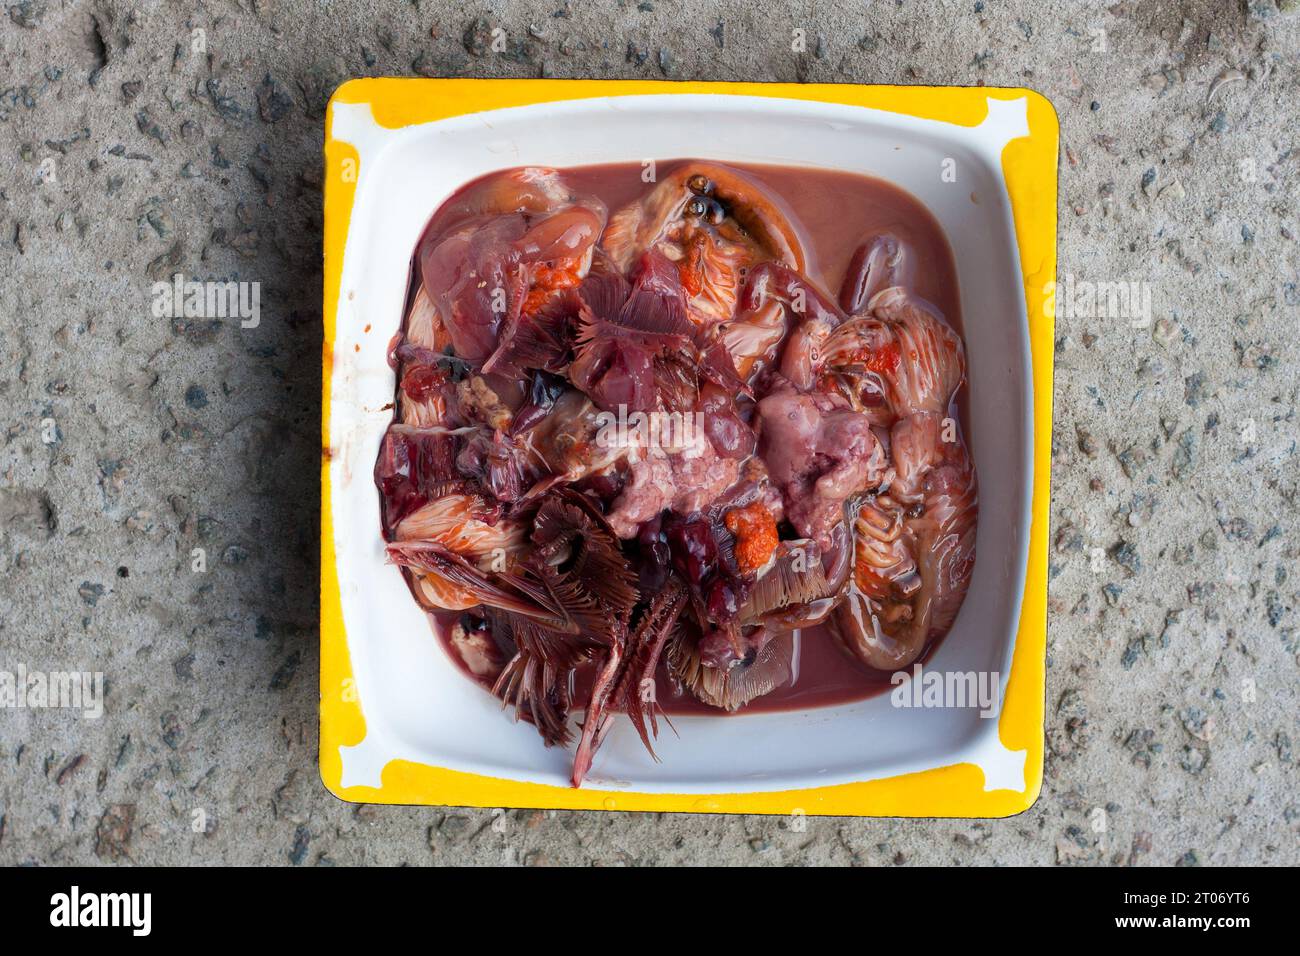 Offal after cutting fish. Fish waste in a bowl on a stone countertop. Fish giblets inedible for humans, animal feed Stock Photo